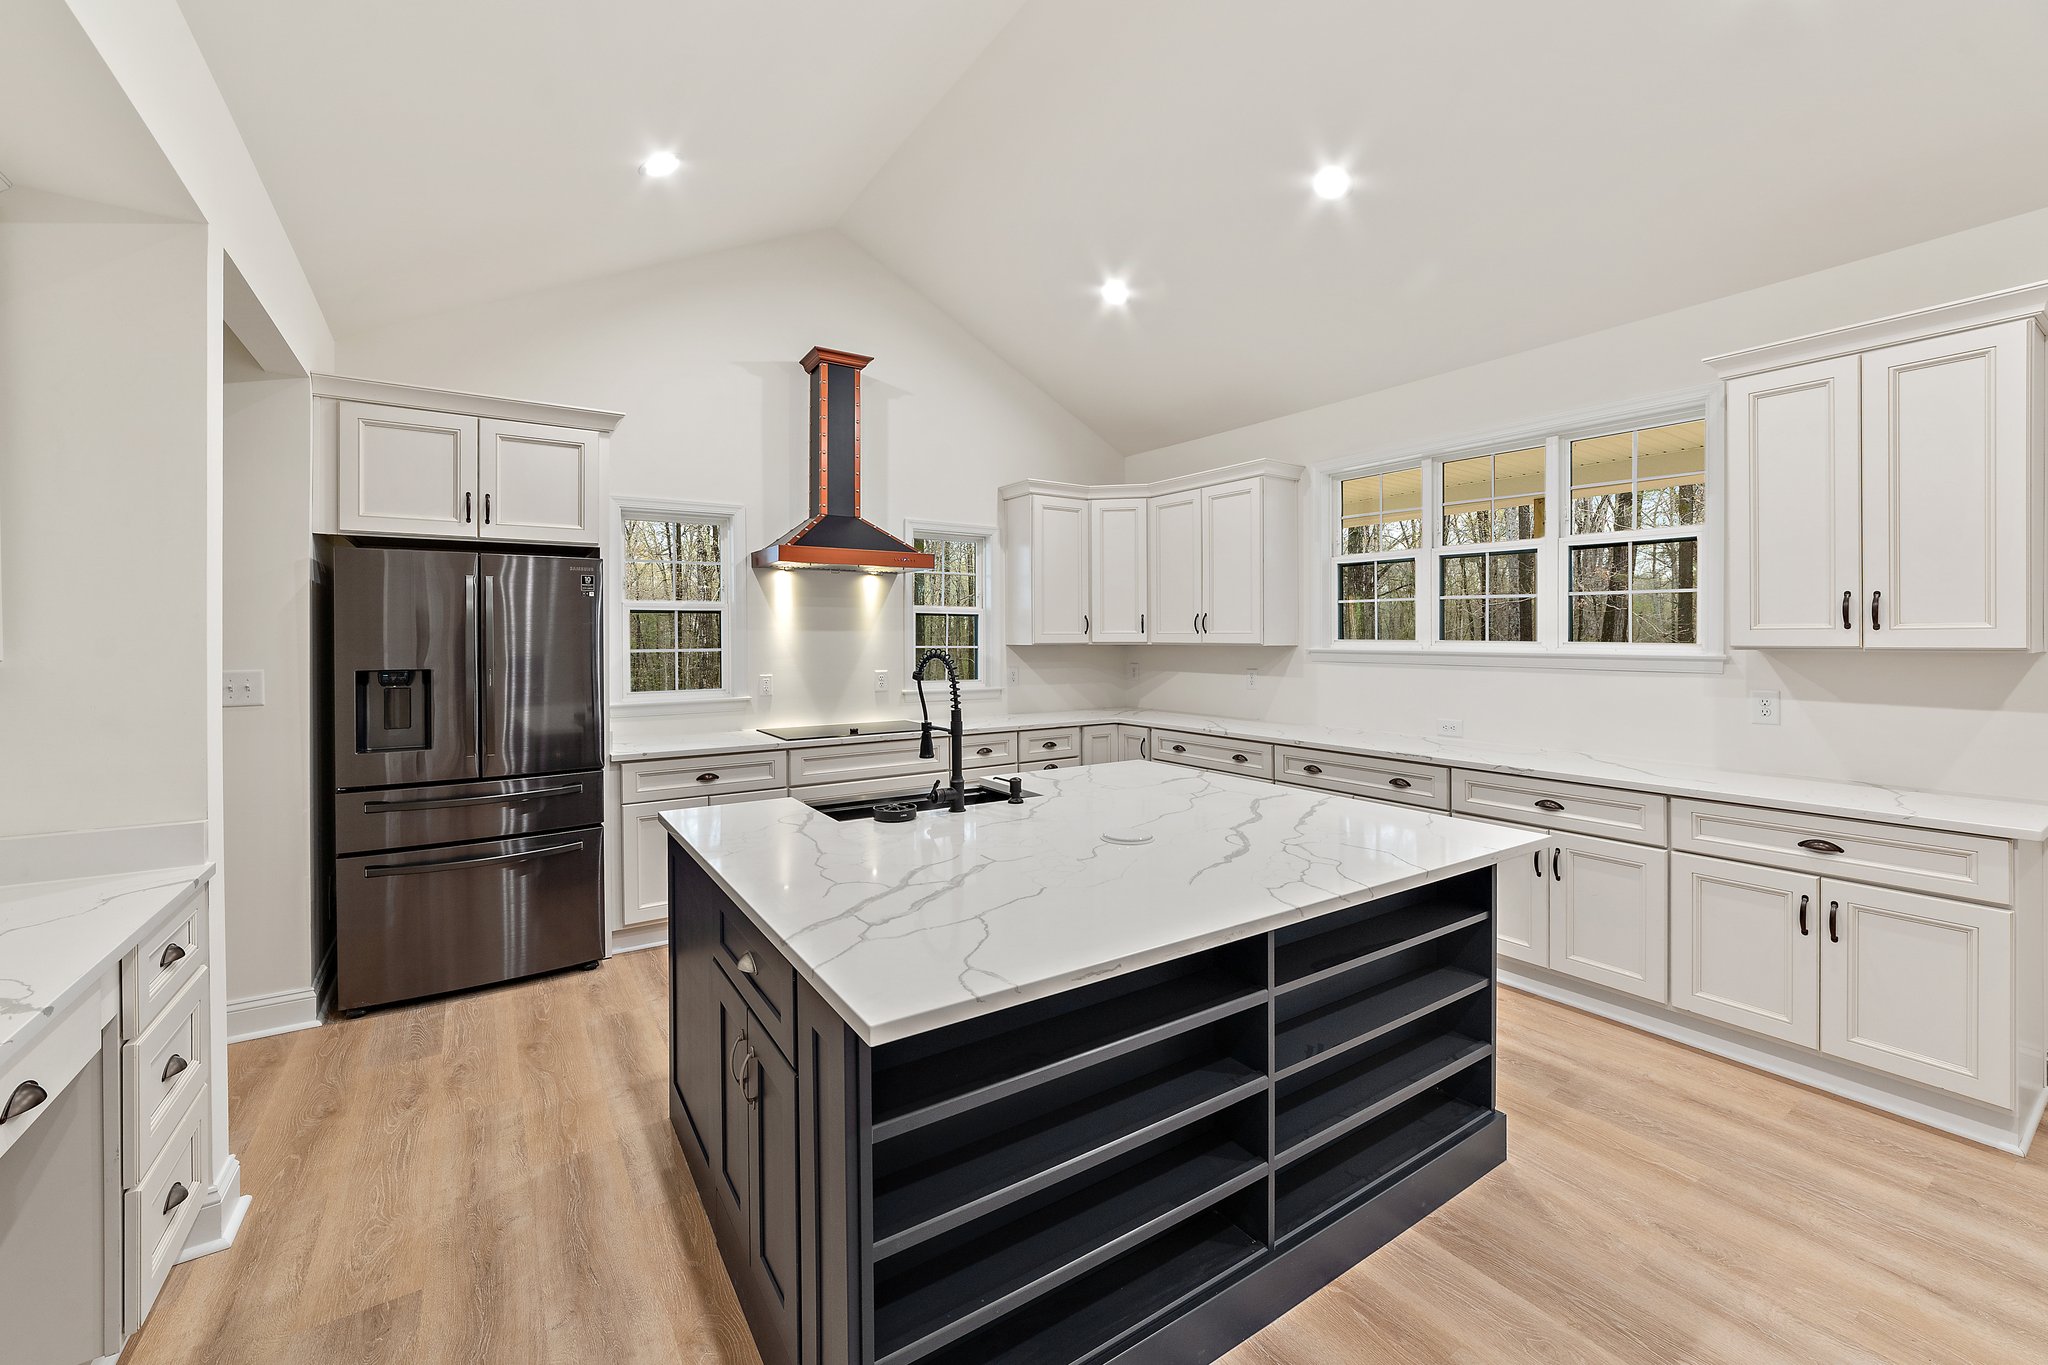 Caliber Home Builder, Ashwood II kitchen with island and lots of storage space